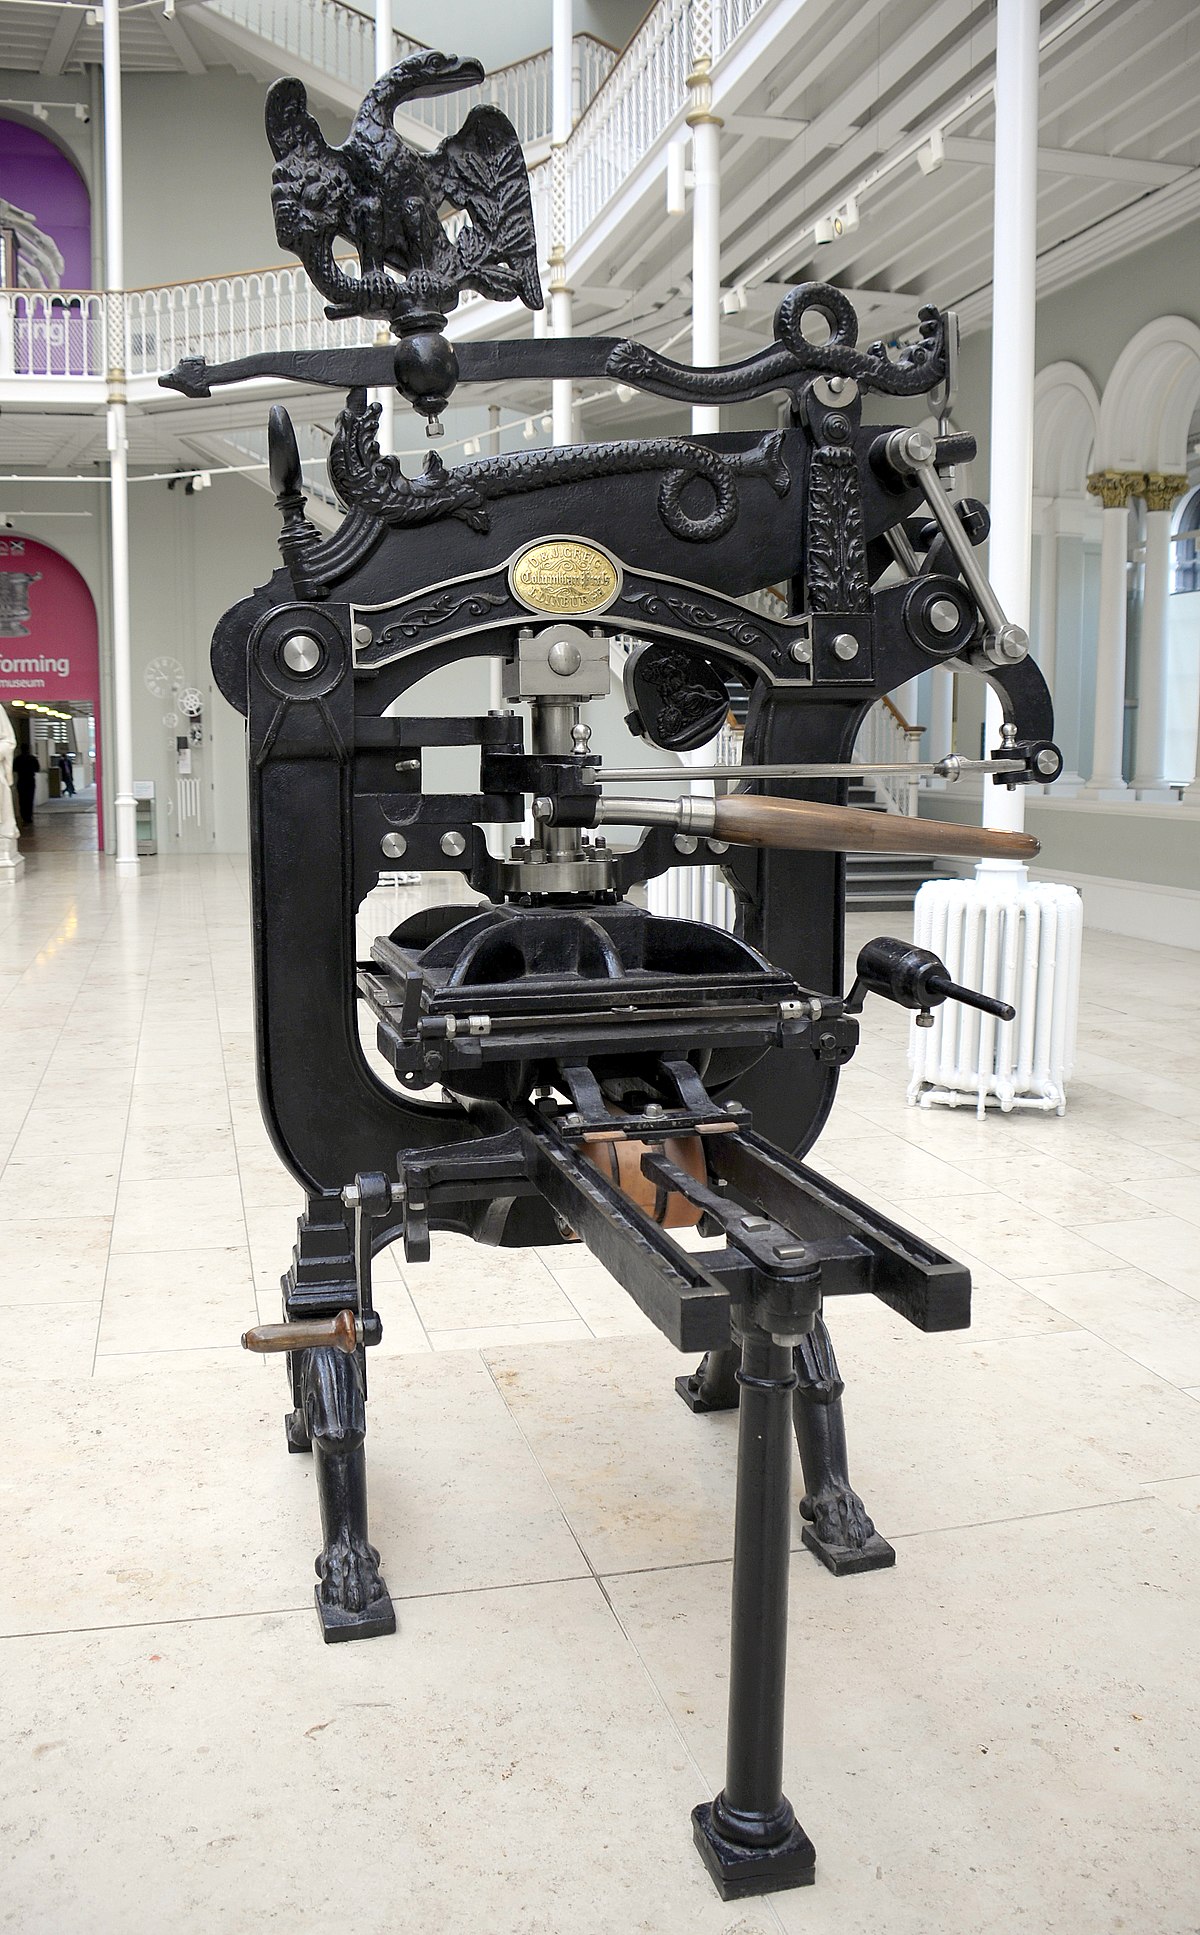 BBC - A History of the World - Object : Cast-iron printing press